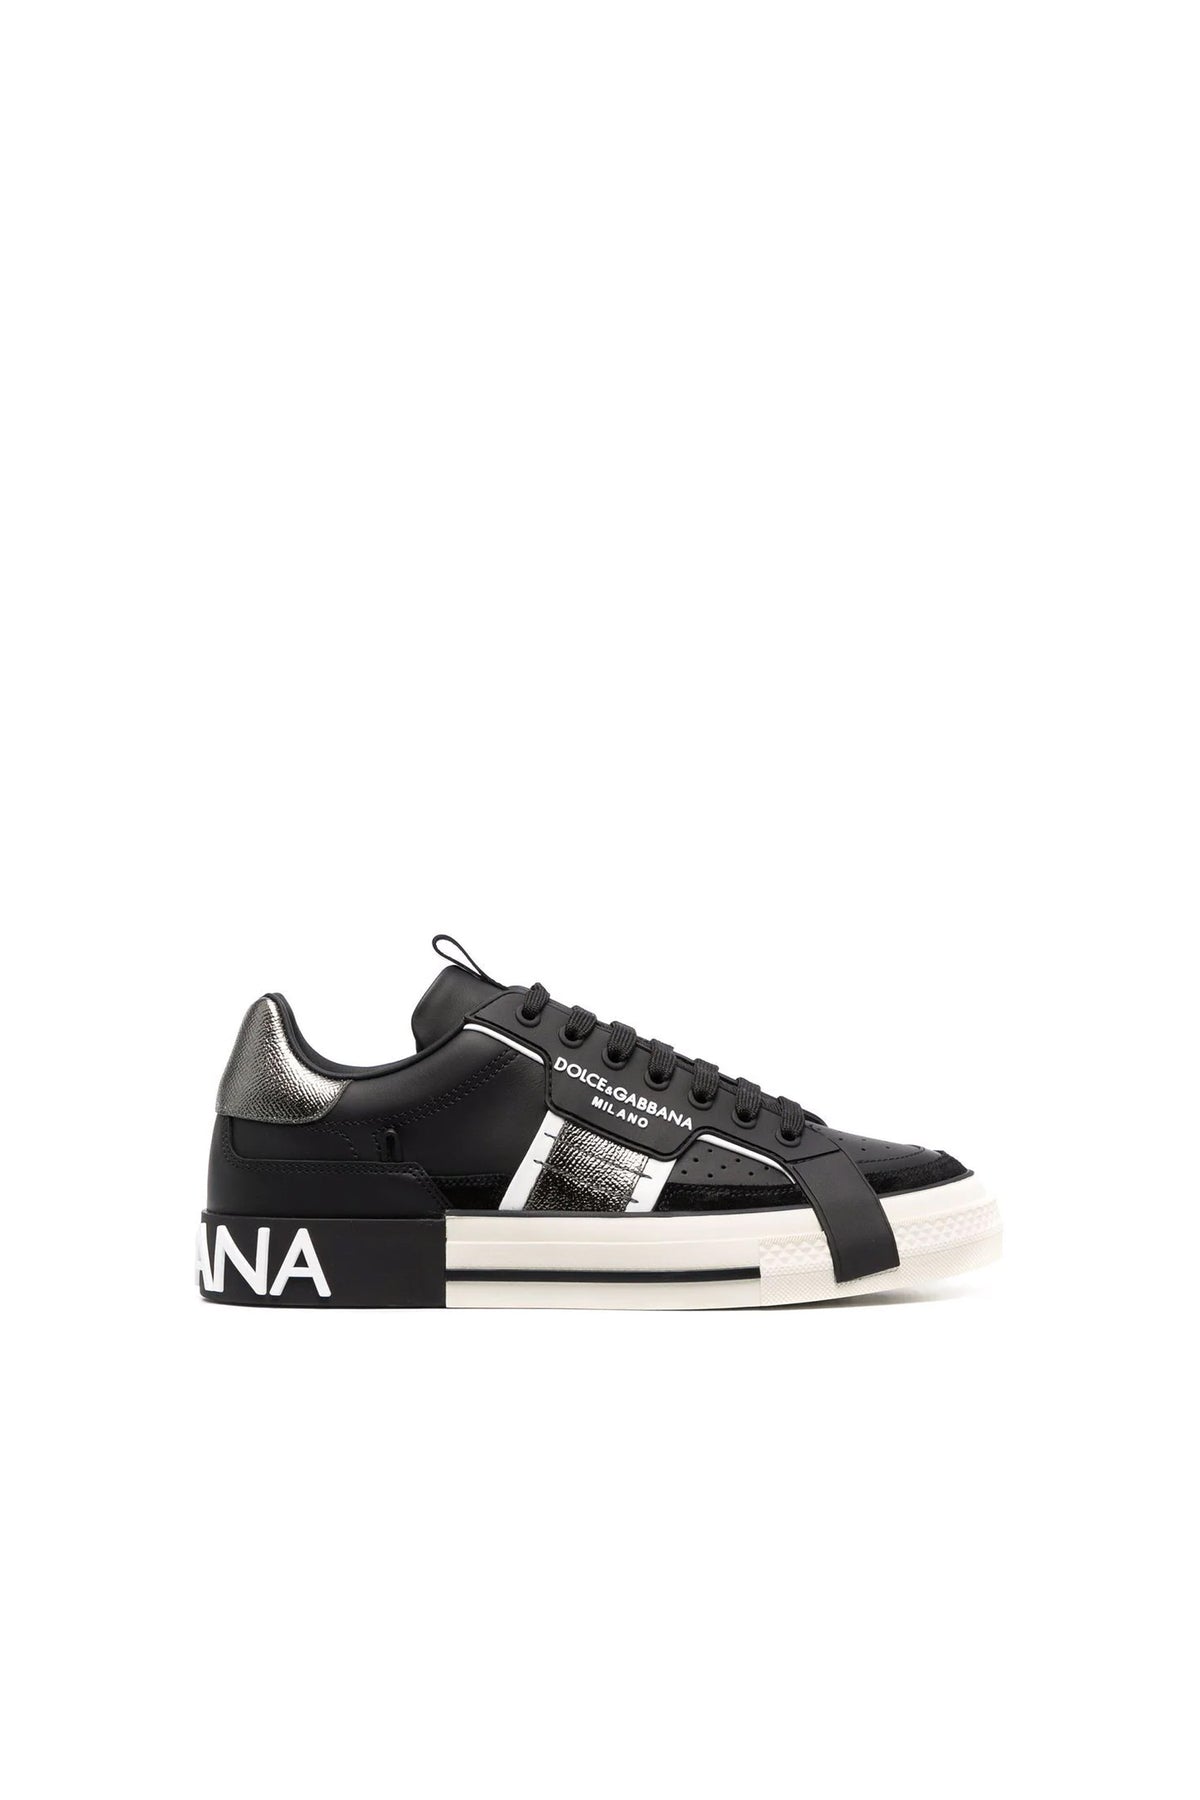 Dolce & Gabbana NS1 low-top sneakers